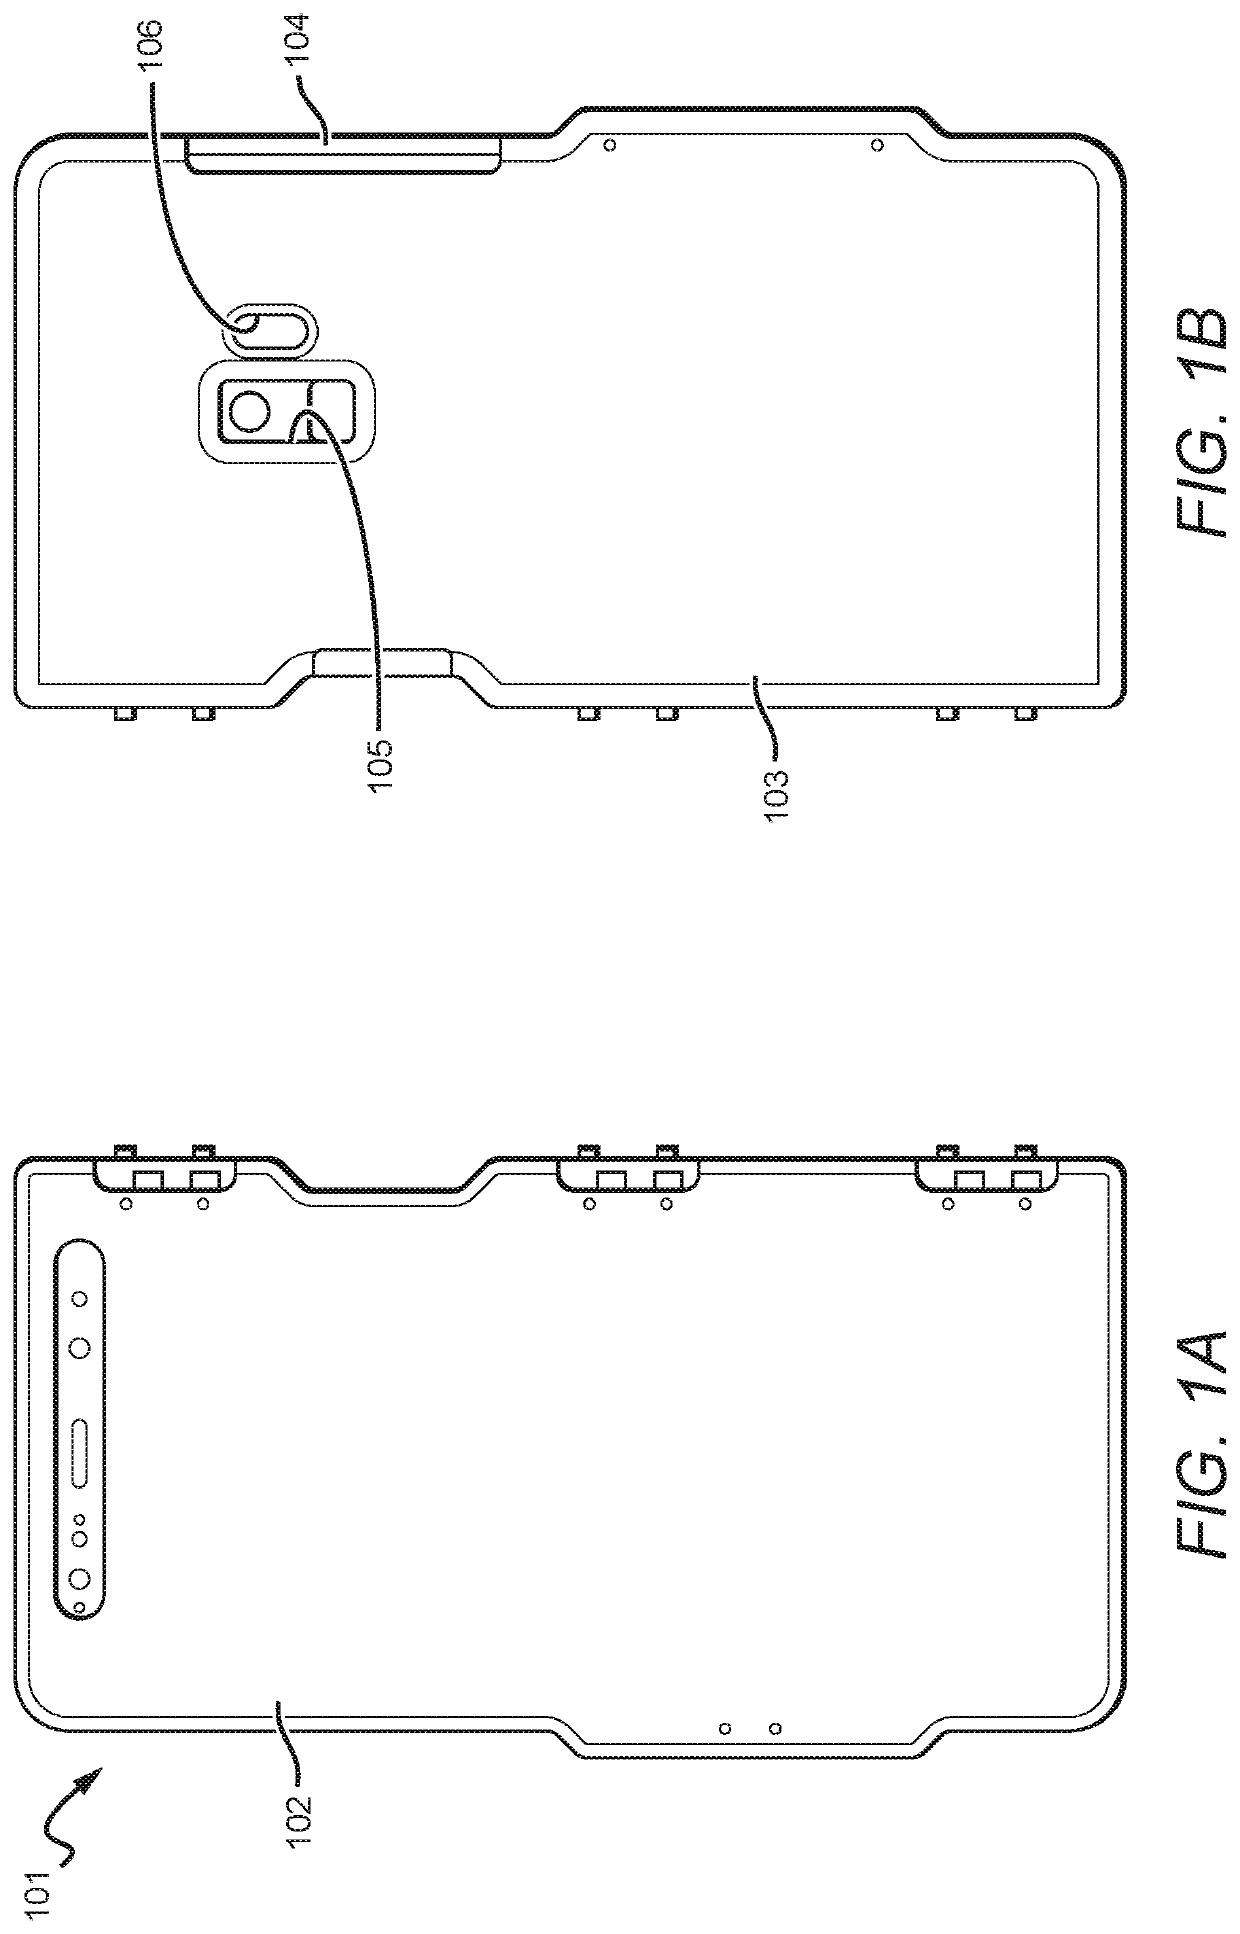 Systems and Methods for a Cellular Phone Enclosure